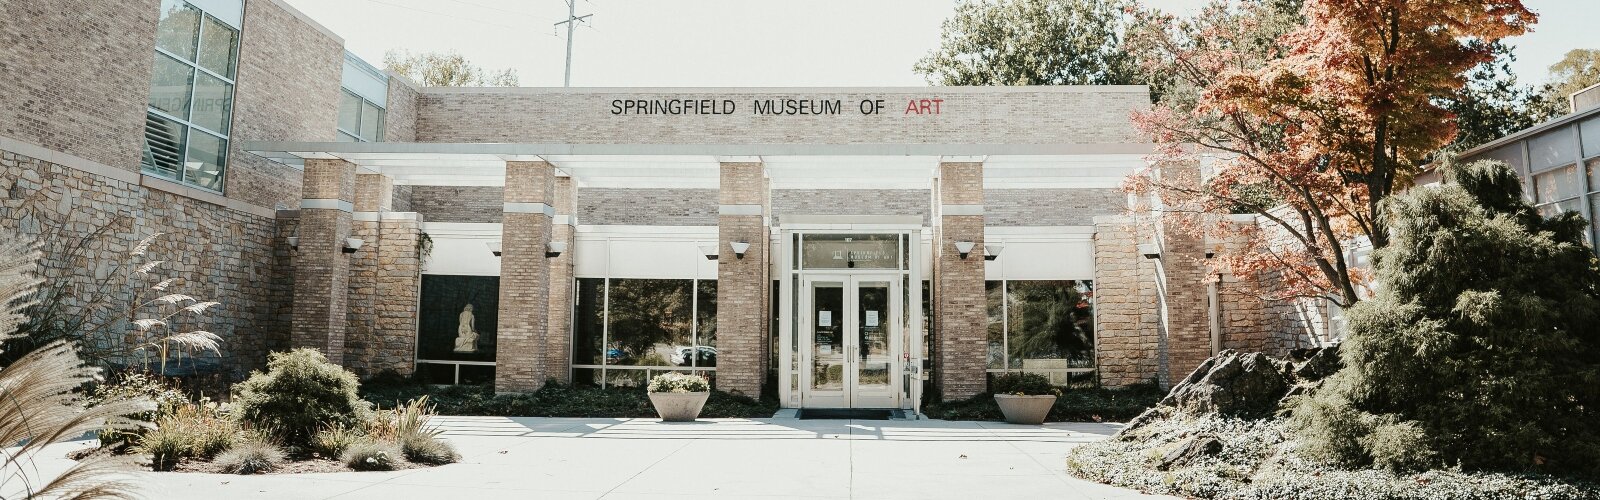 The Springfield Museum of Art.